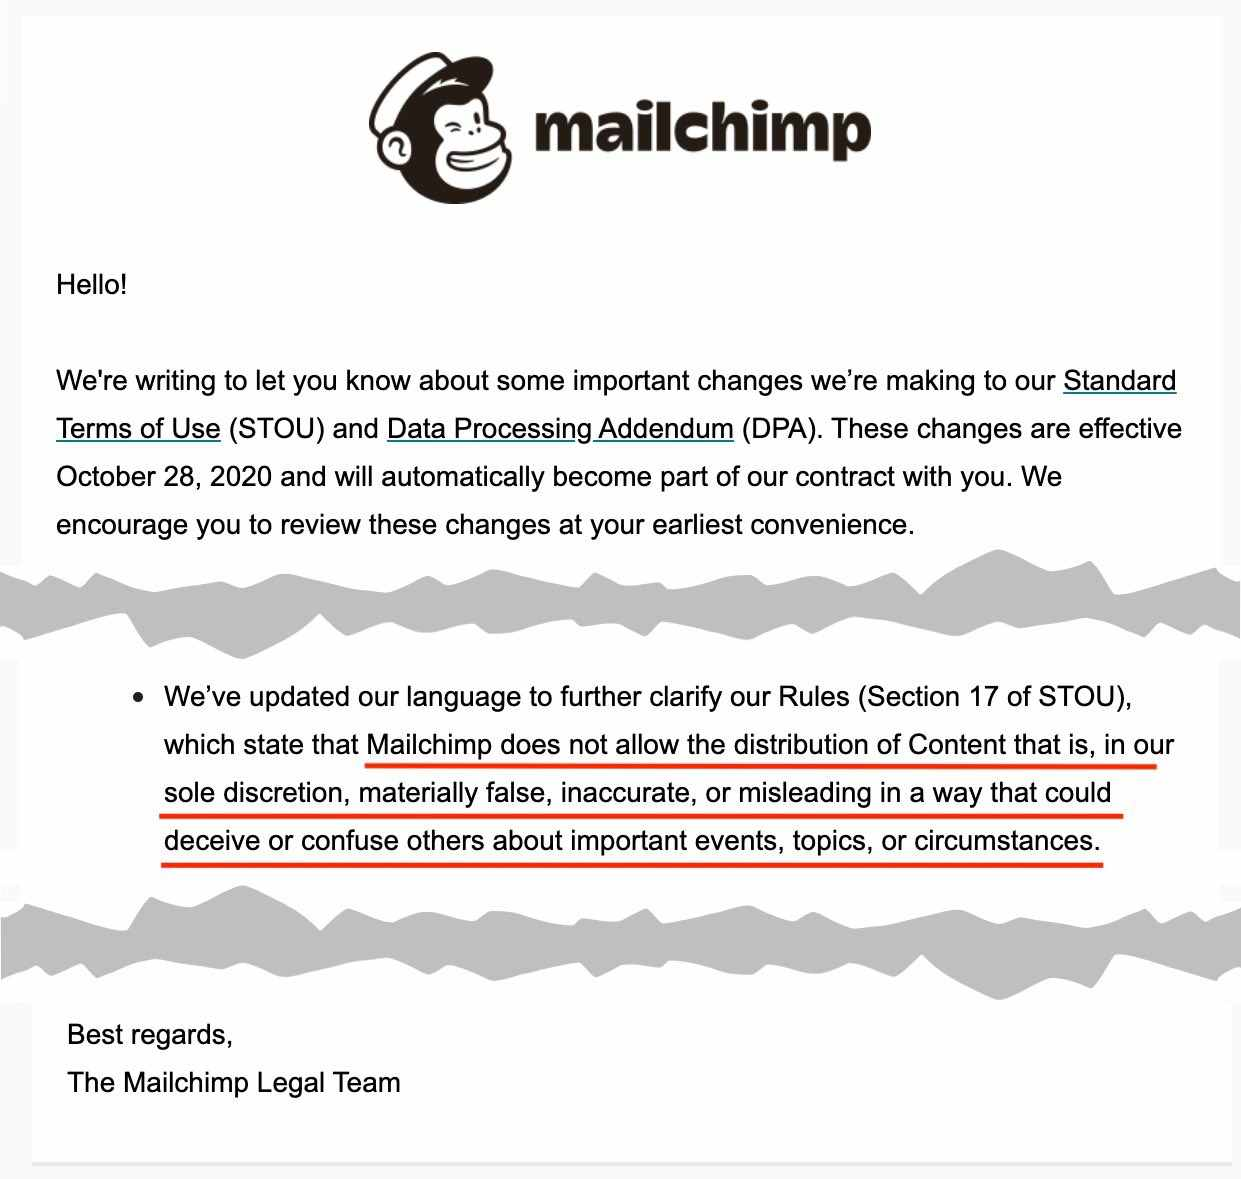 Mailchimp is now going to fact-check all your emails